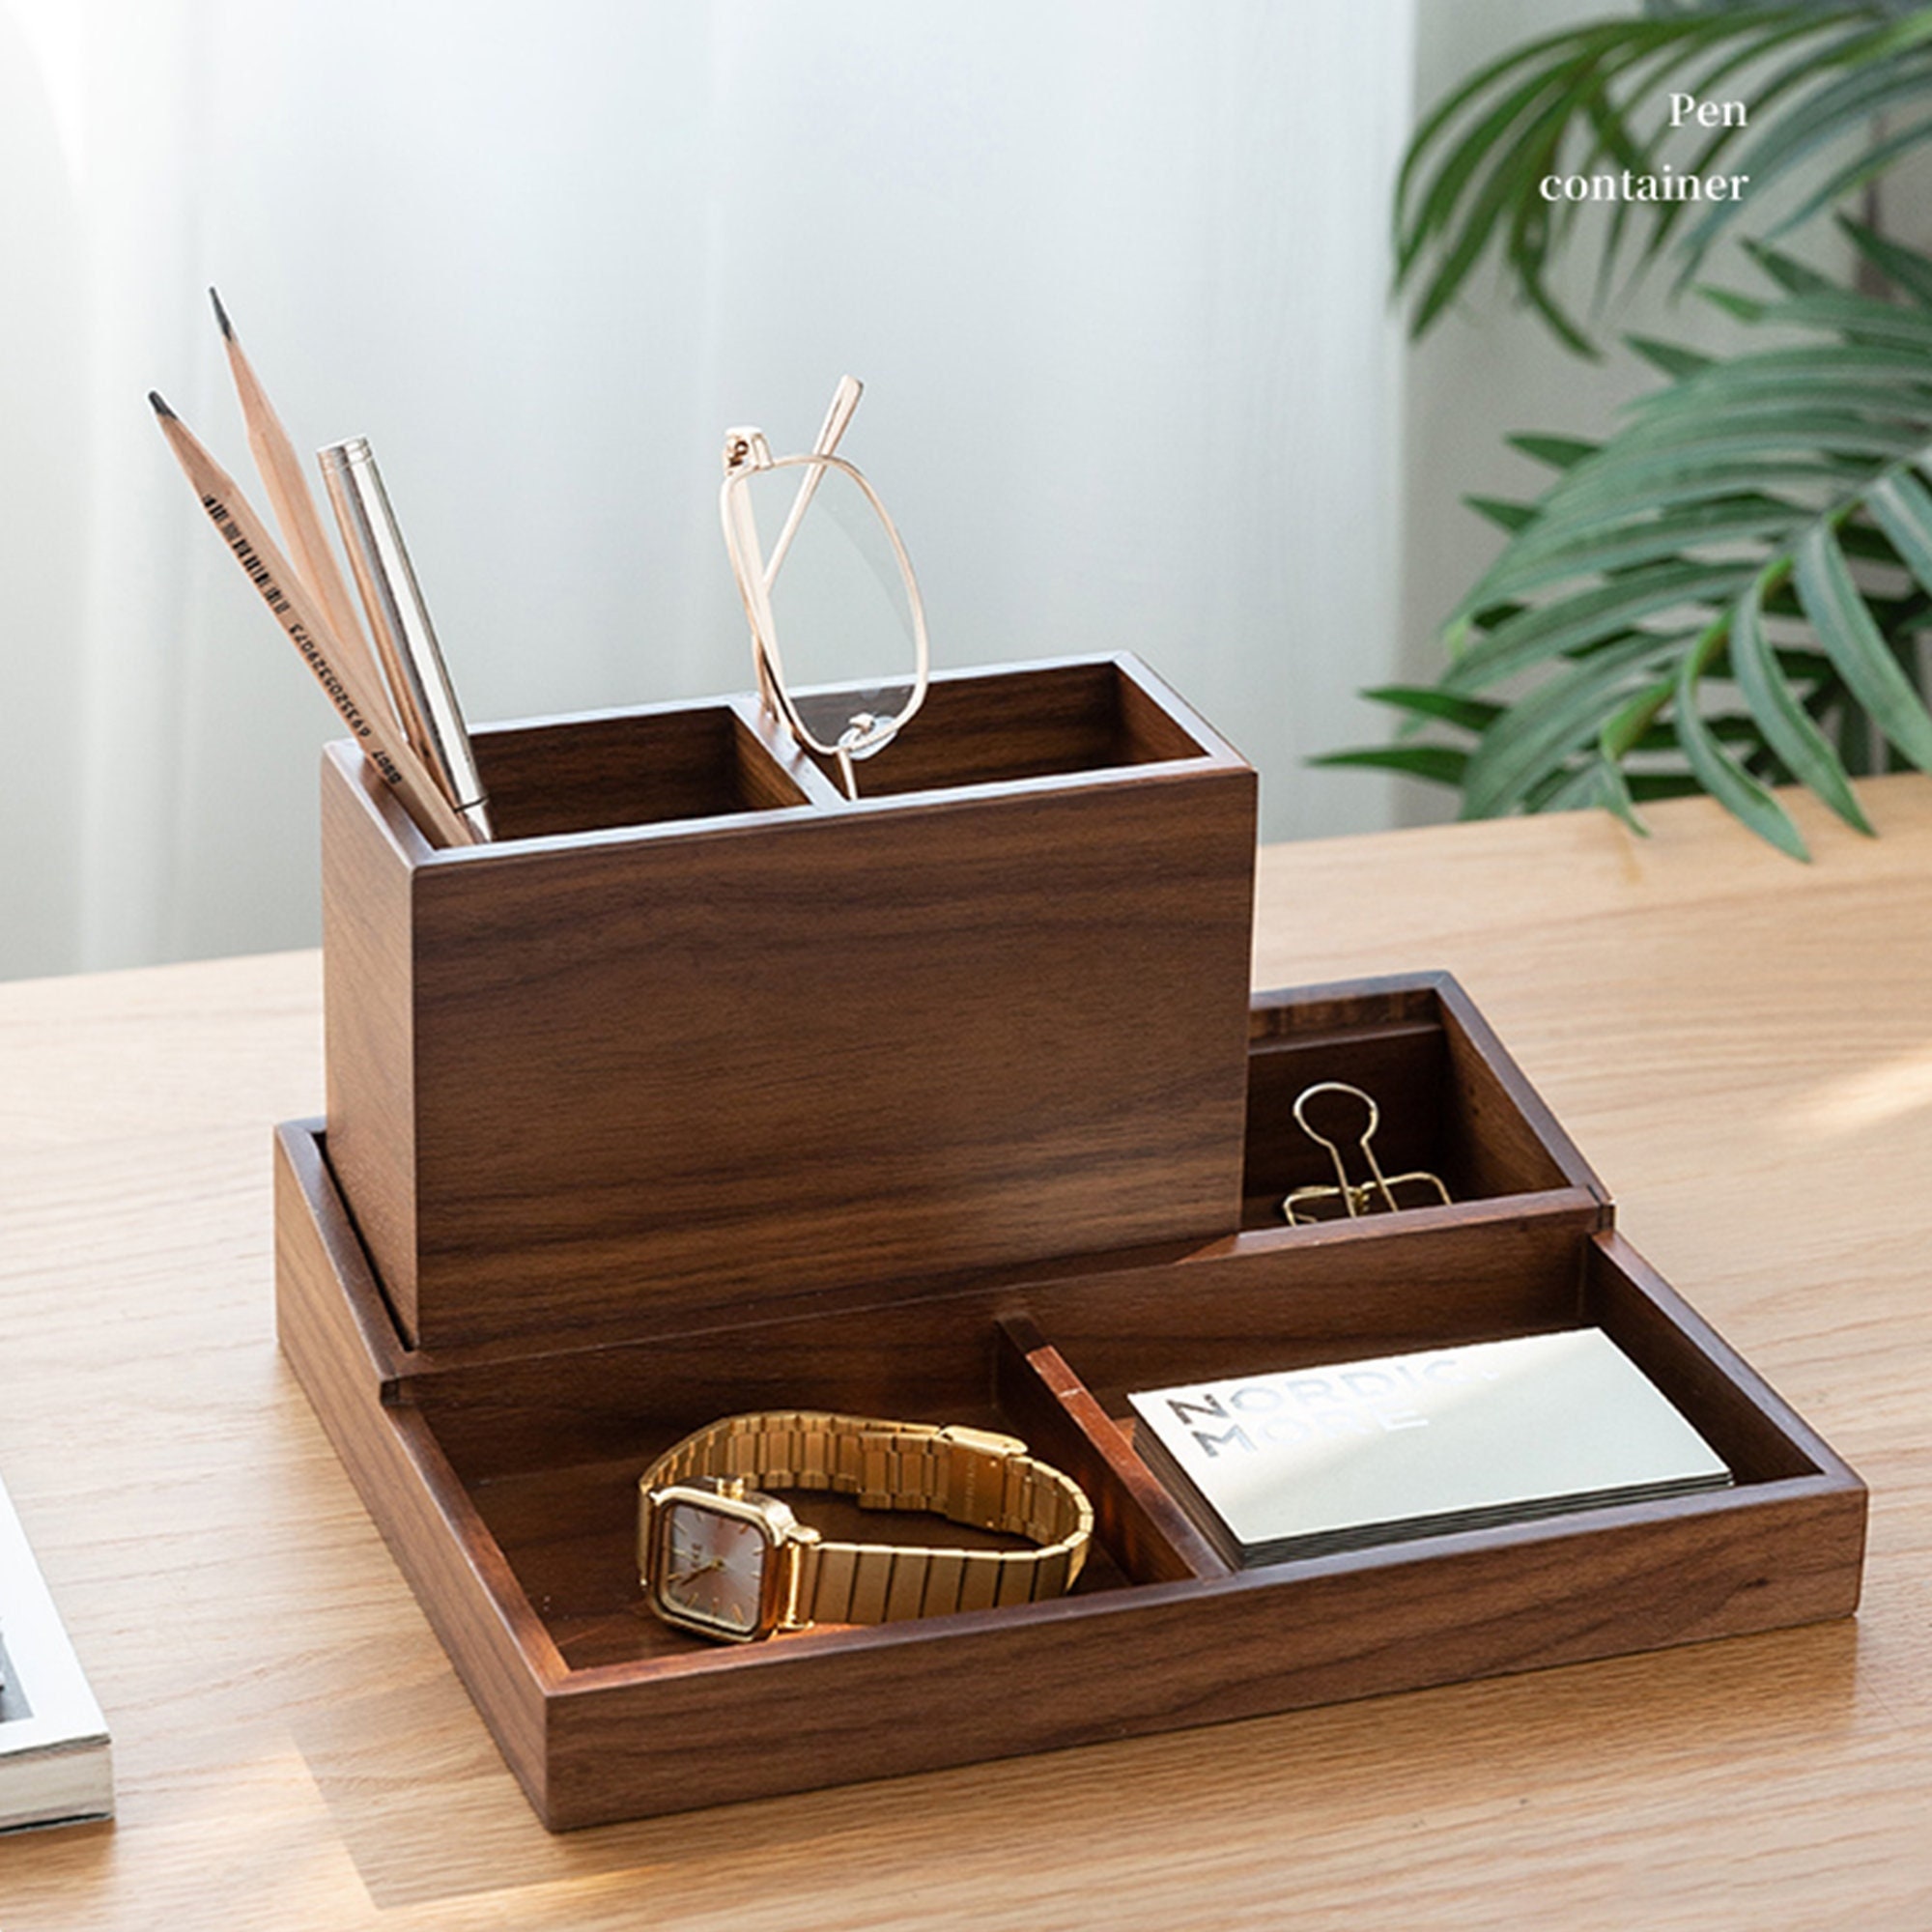 Personalized Premium Walnut Desk Organizer With Multi-compartments Storage,  Desktop Office Organizer for Stationery and Accessories 